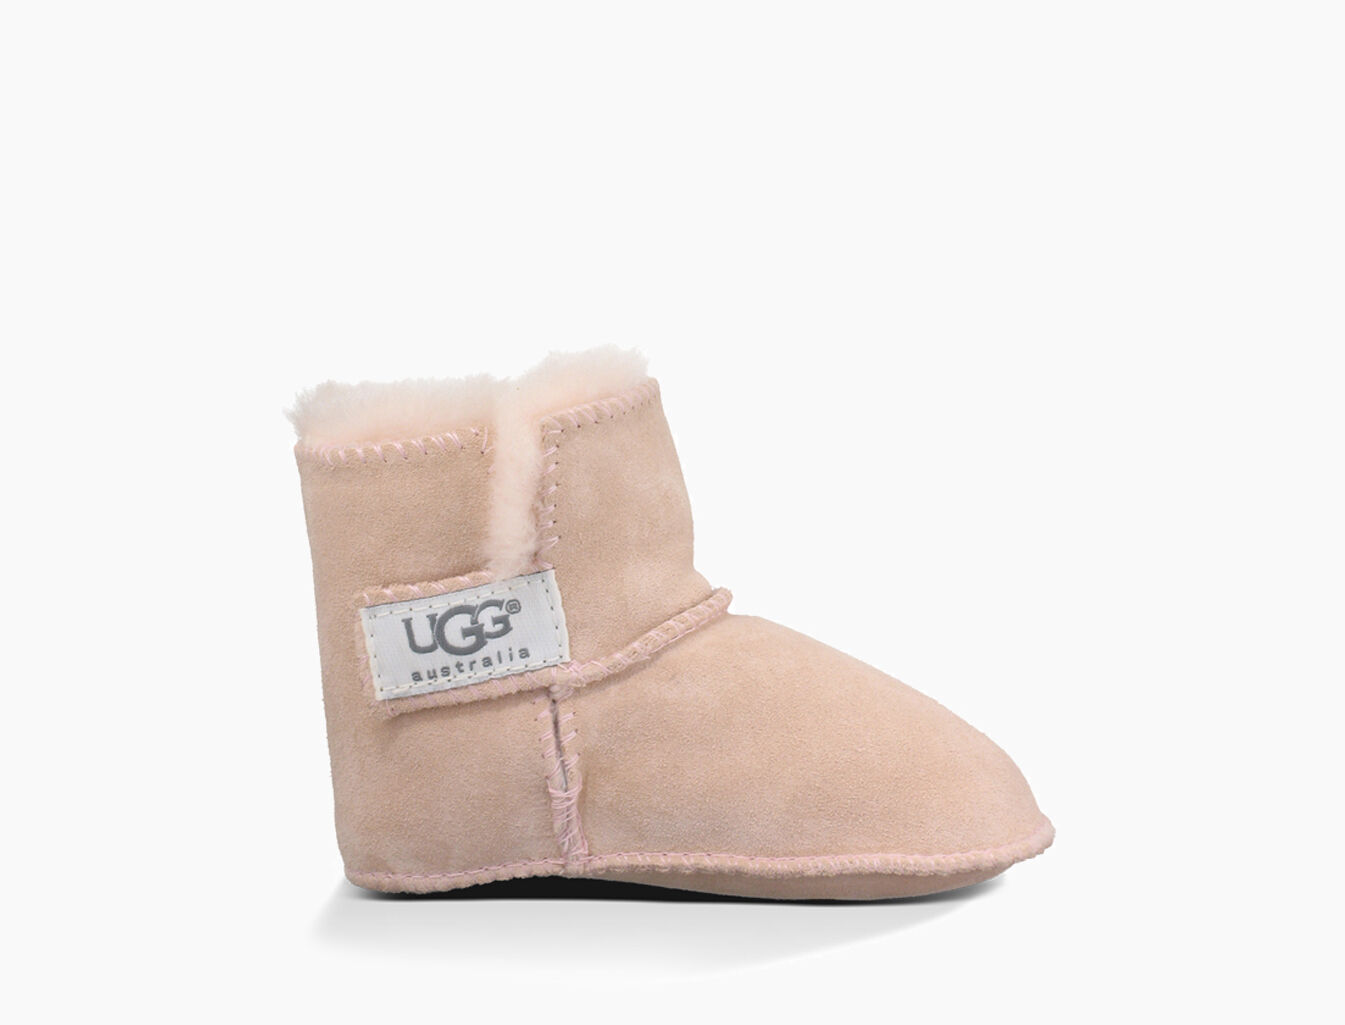 ugg shoes for babies